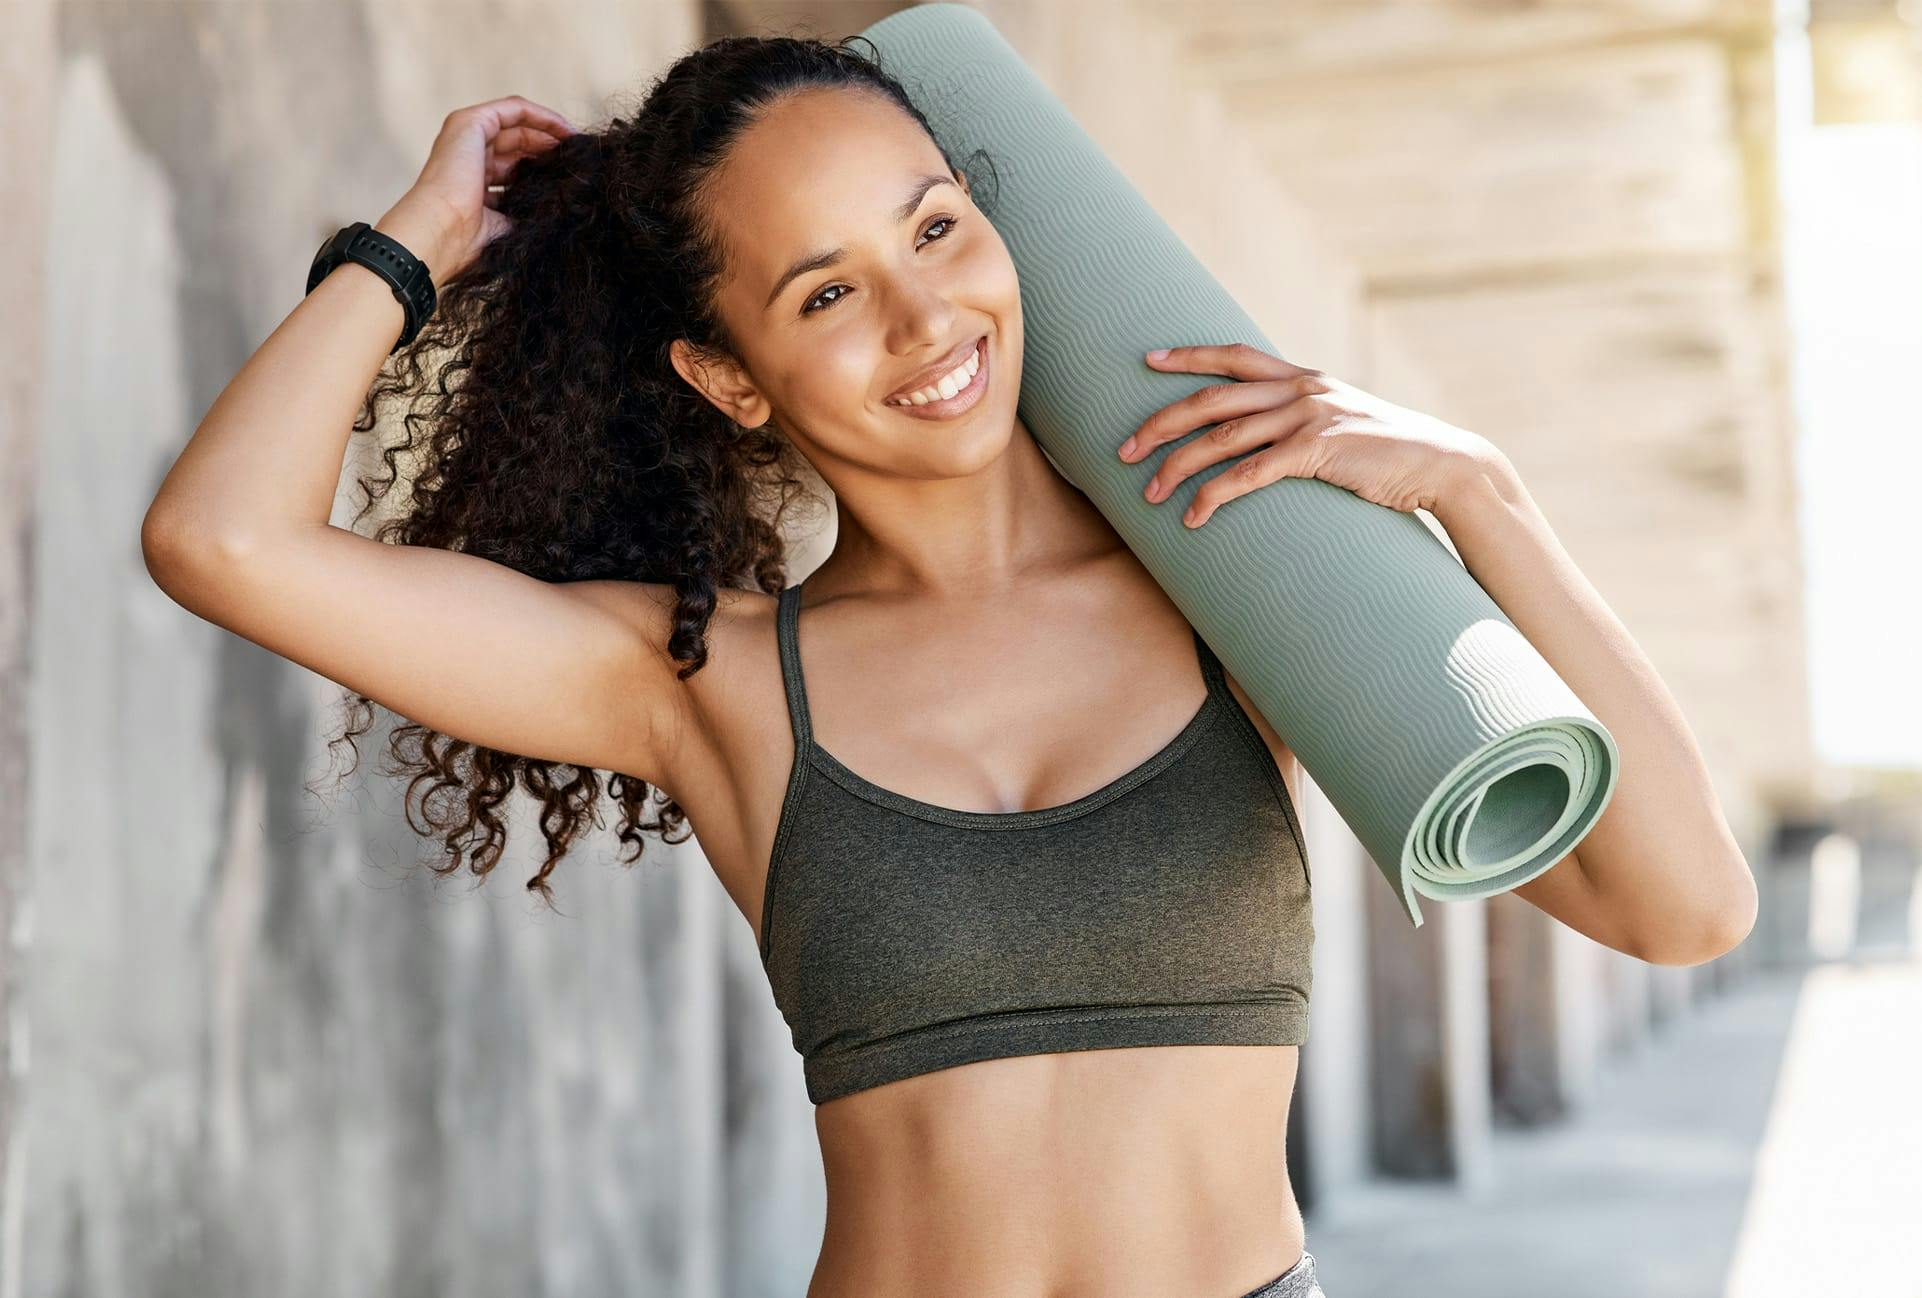 smiling woman with curly hair wearing athletic wear holding yoga mat